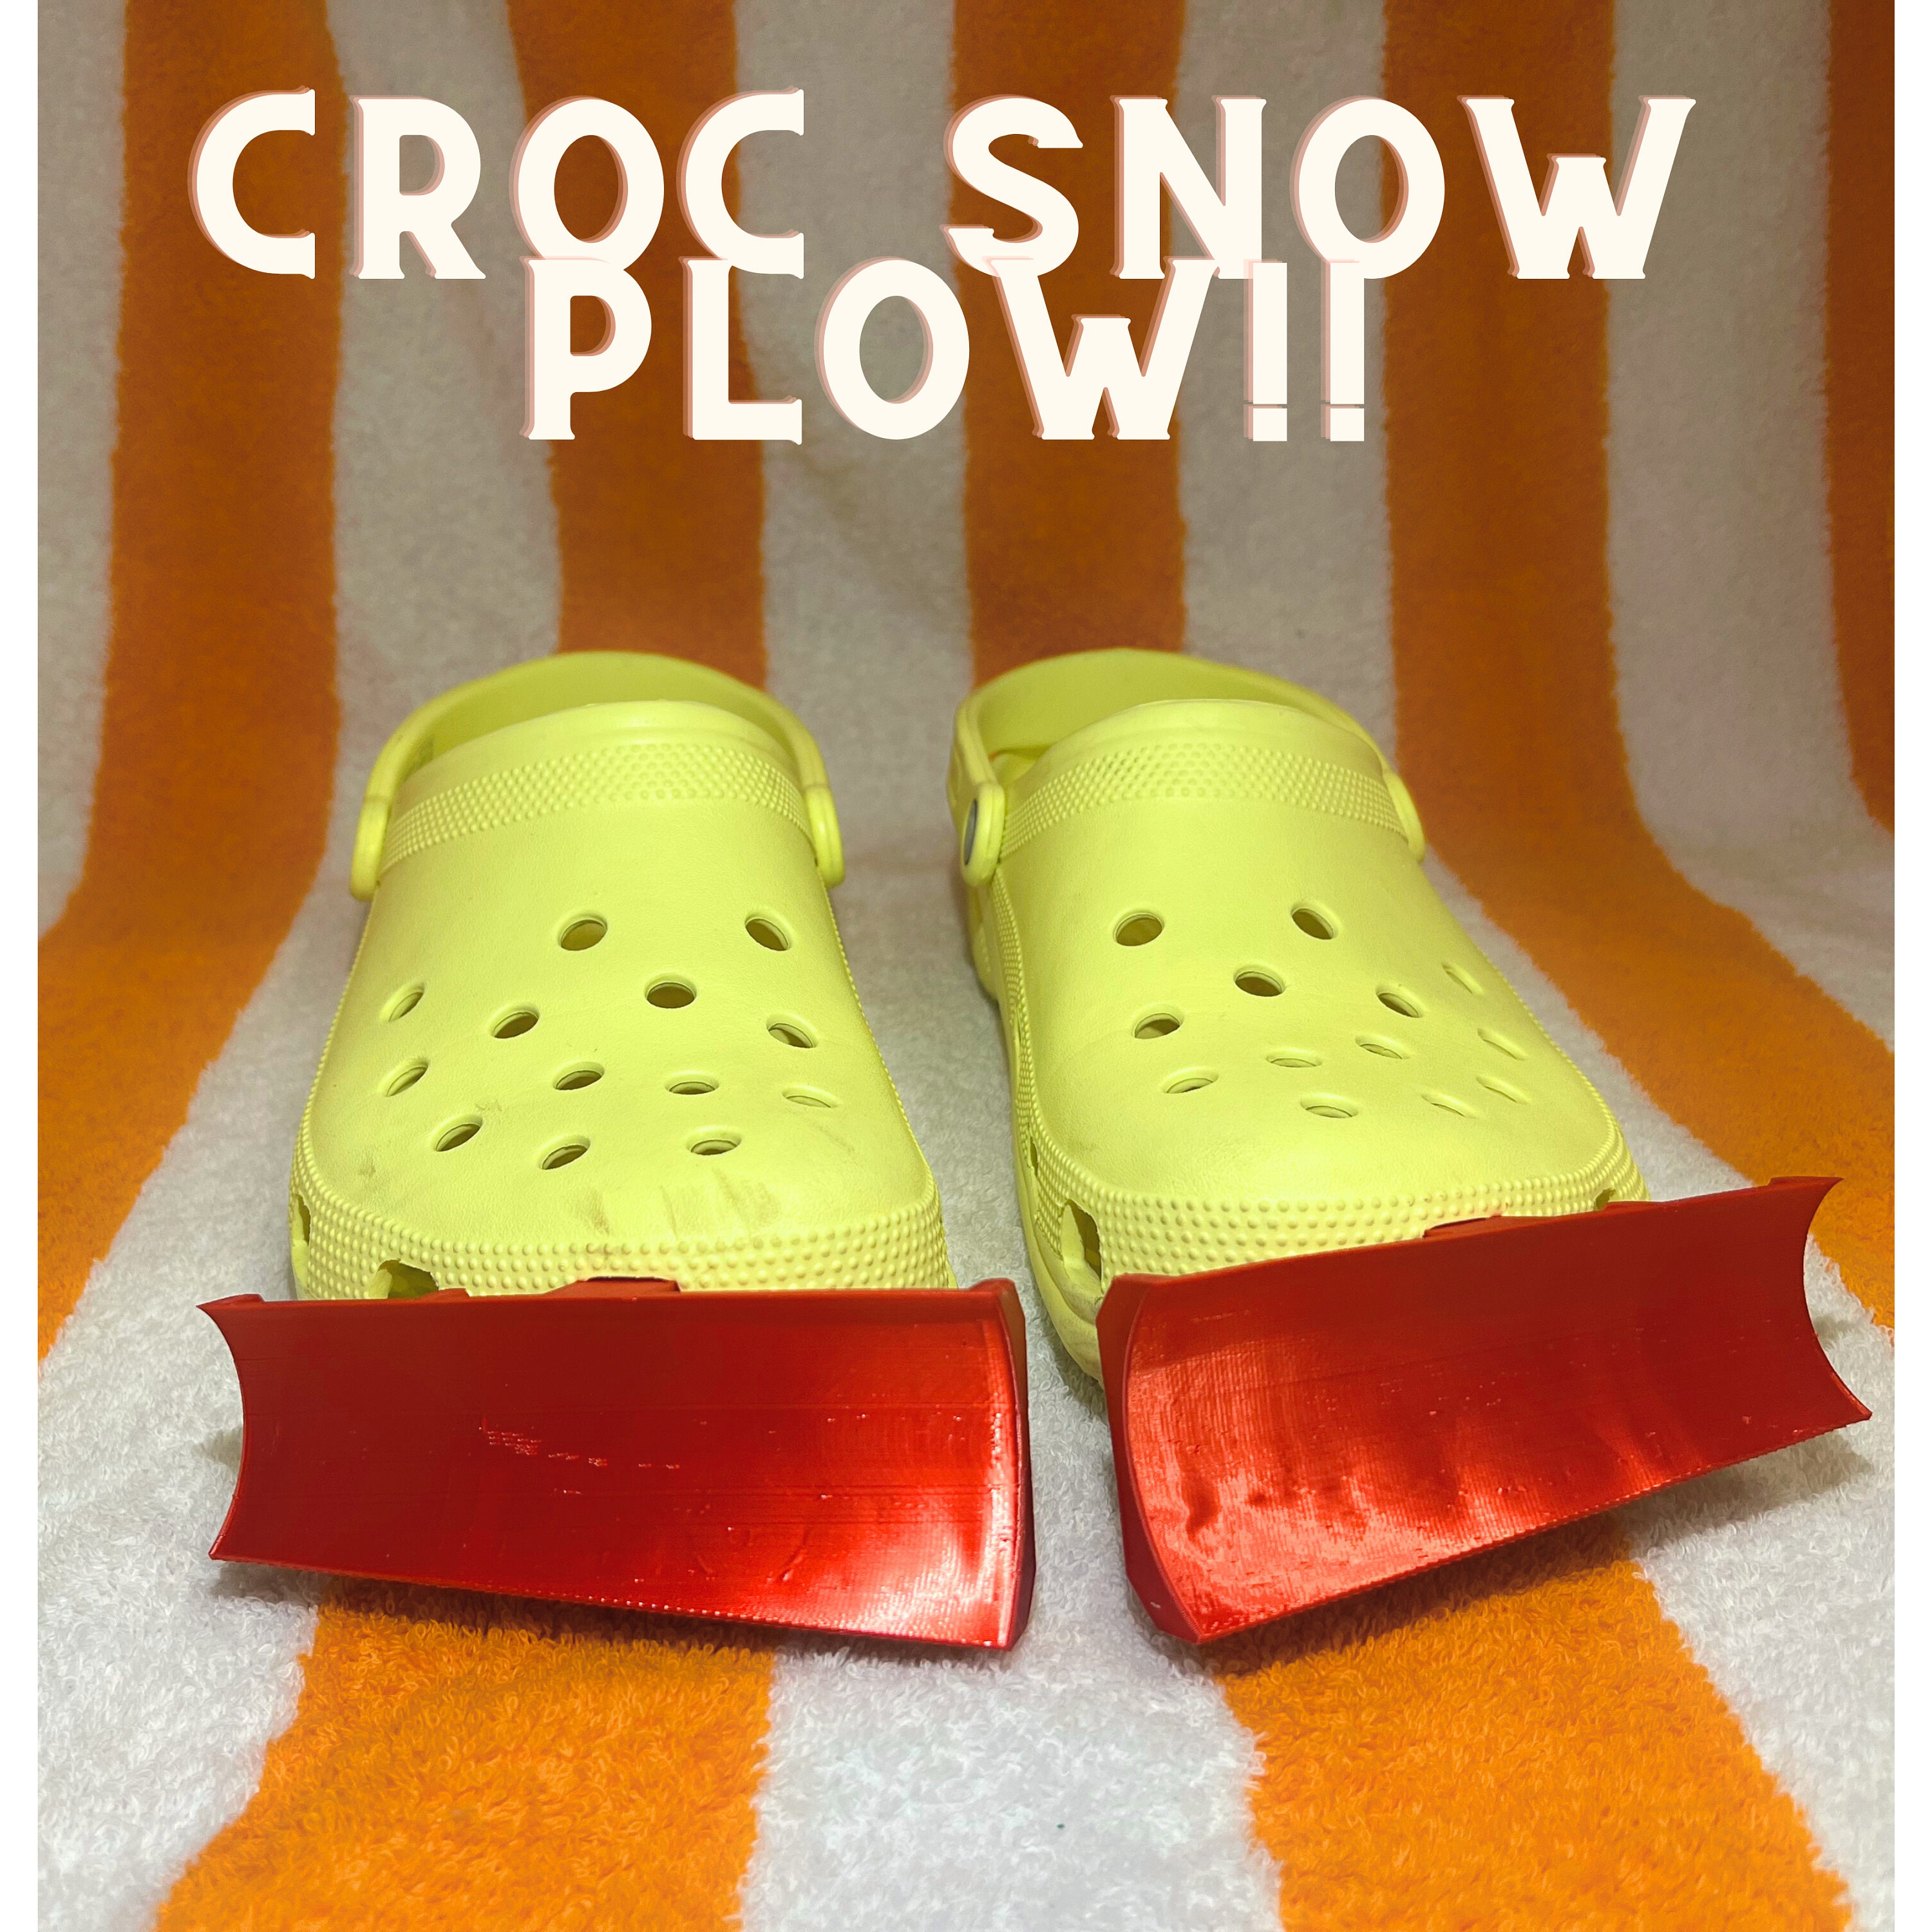 CROC Snow/ Sand PLOWS PCK 2 for Both Left and Right Croc Plow 3D Printed  Multi-color Option 